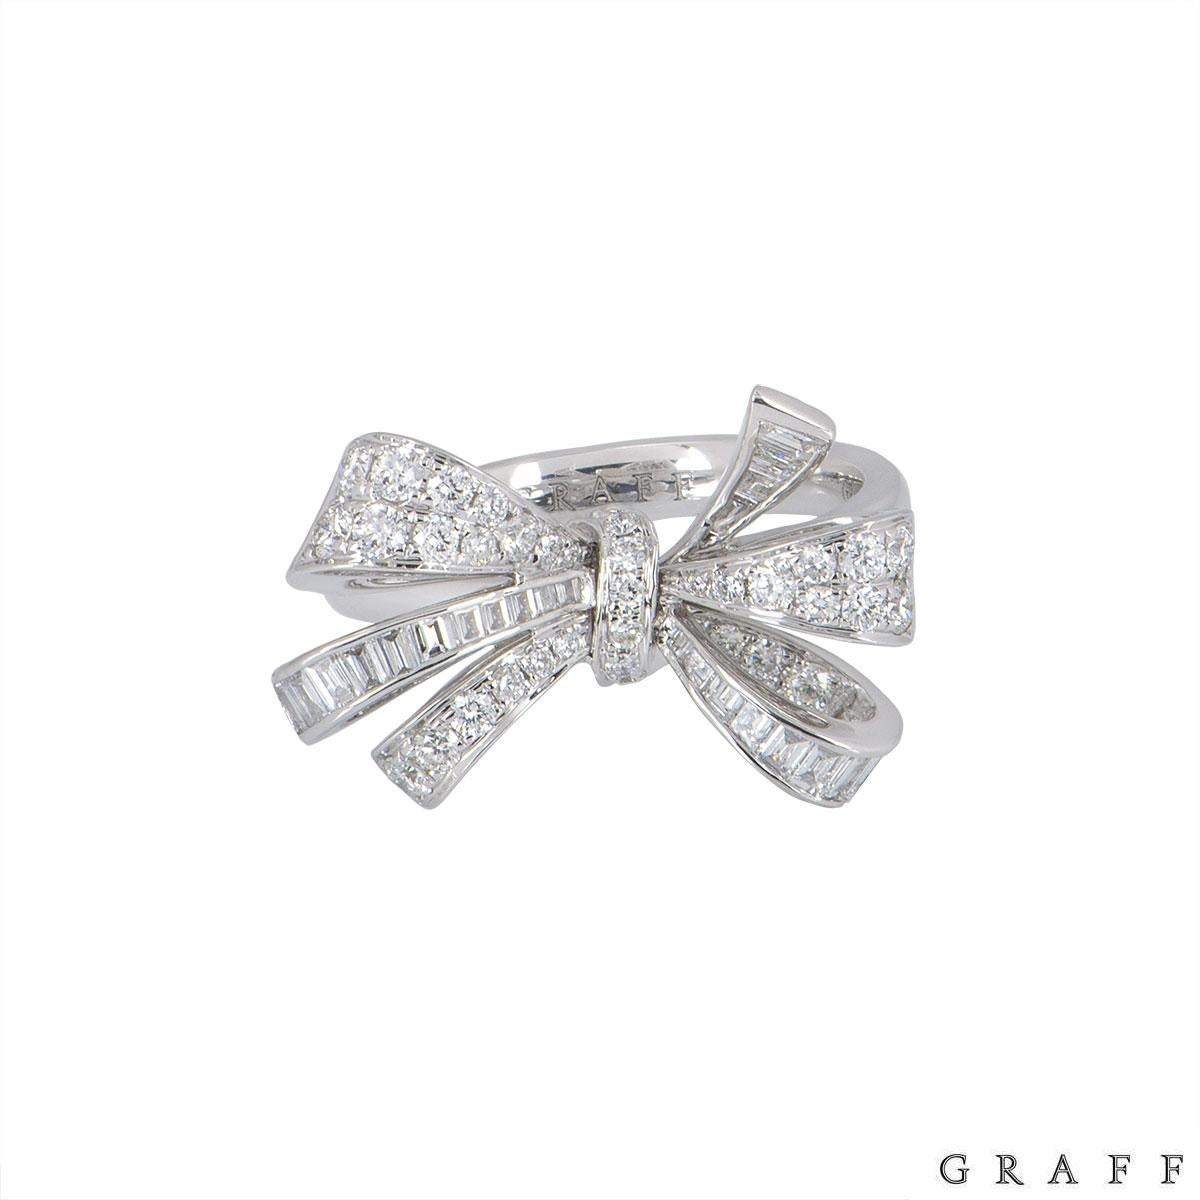 An 18k white gold diamond ring by Graff from the Bow collection. The ring features a bow design set with round brilliant cut and baguette cut diamonds. The round brilliant cut diamonds have an approximate weight of 0.70ct and the baguette cut